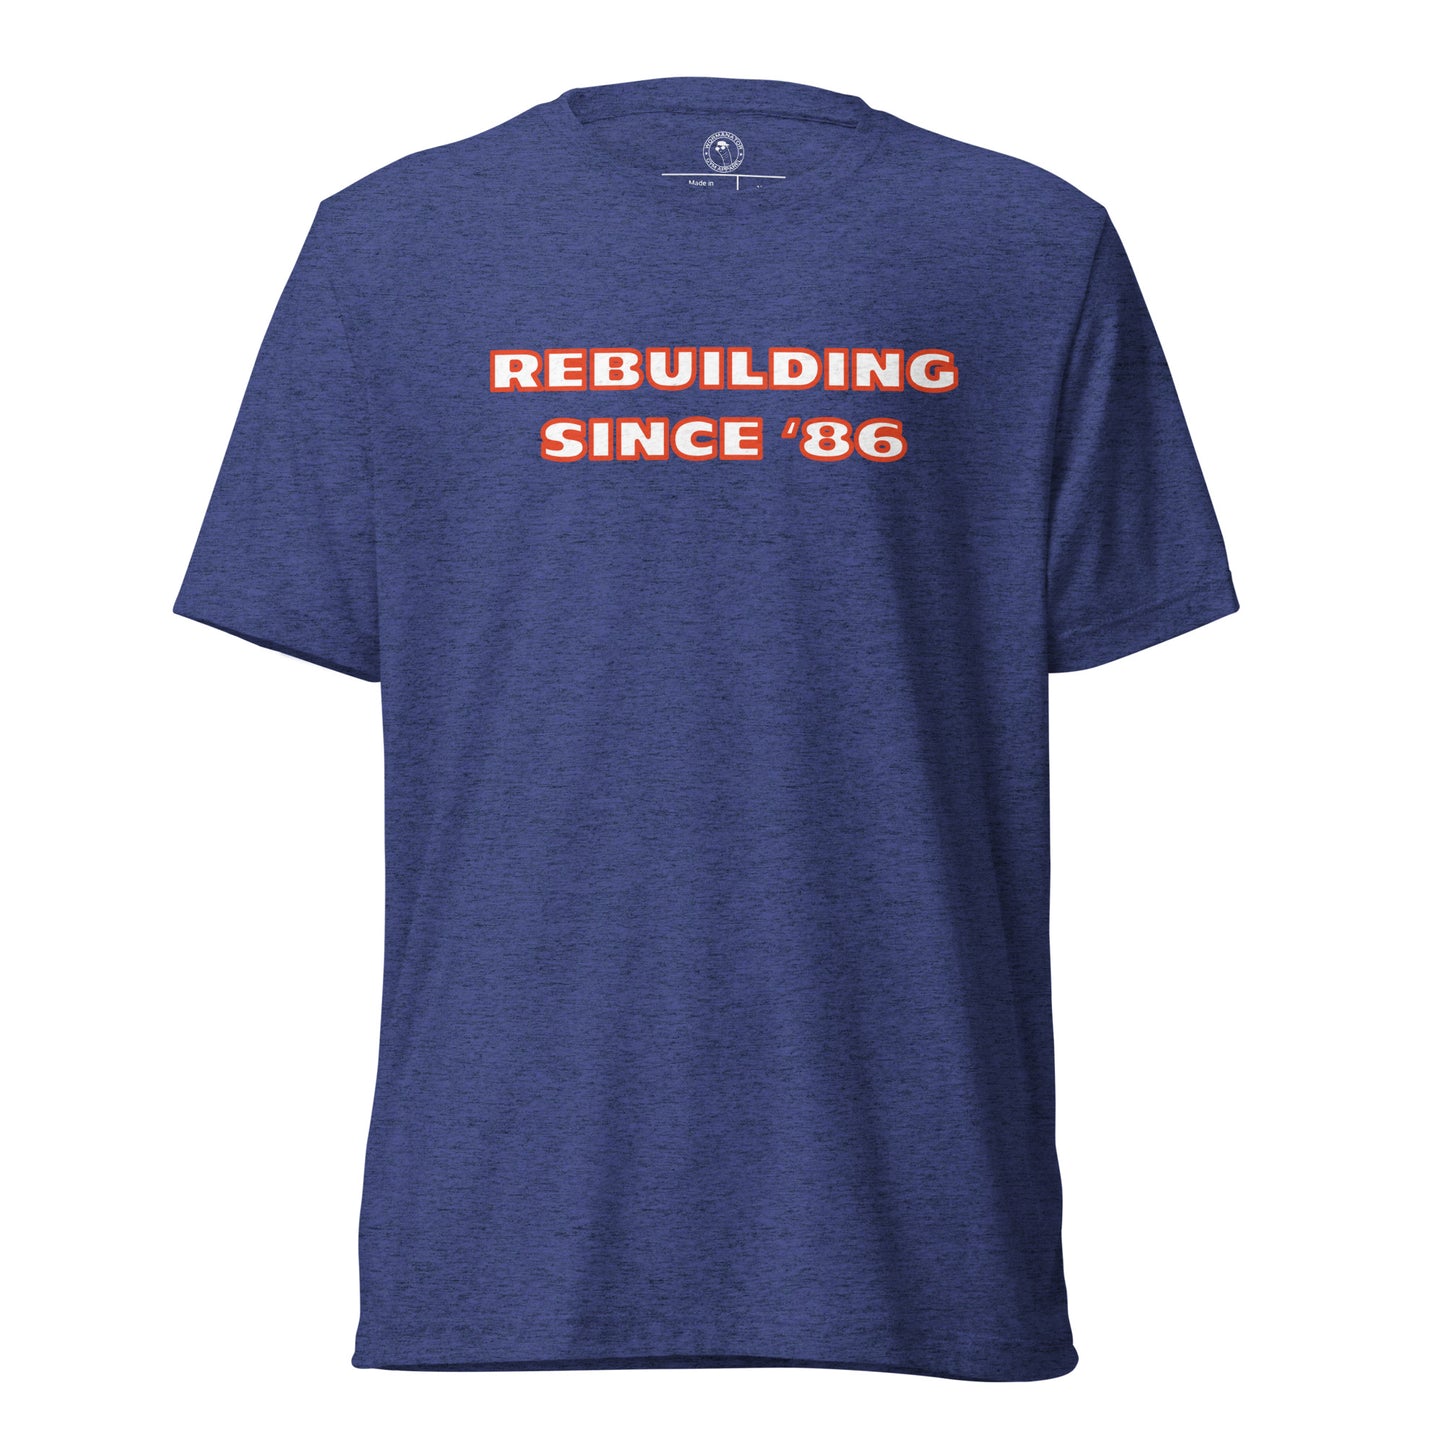 Chicago Bears Rebuilding Since 1986 Shirt in Navy Triblend